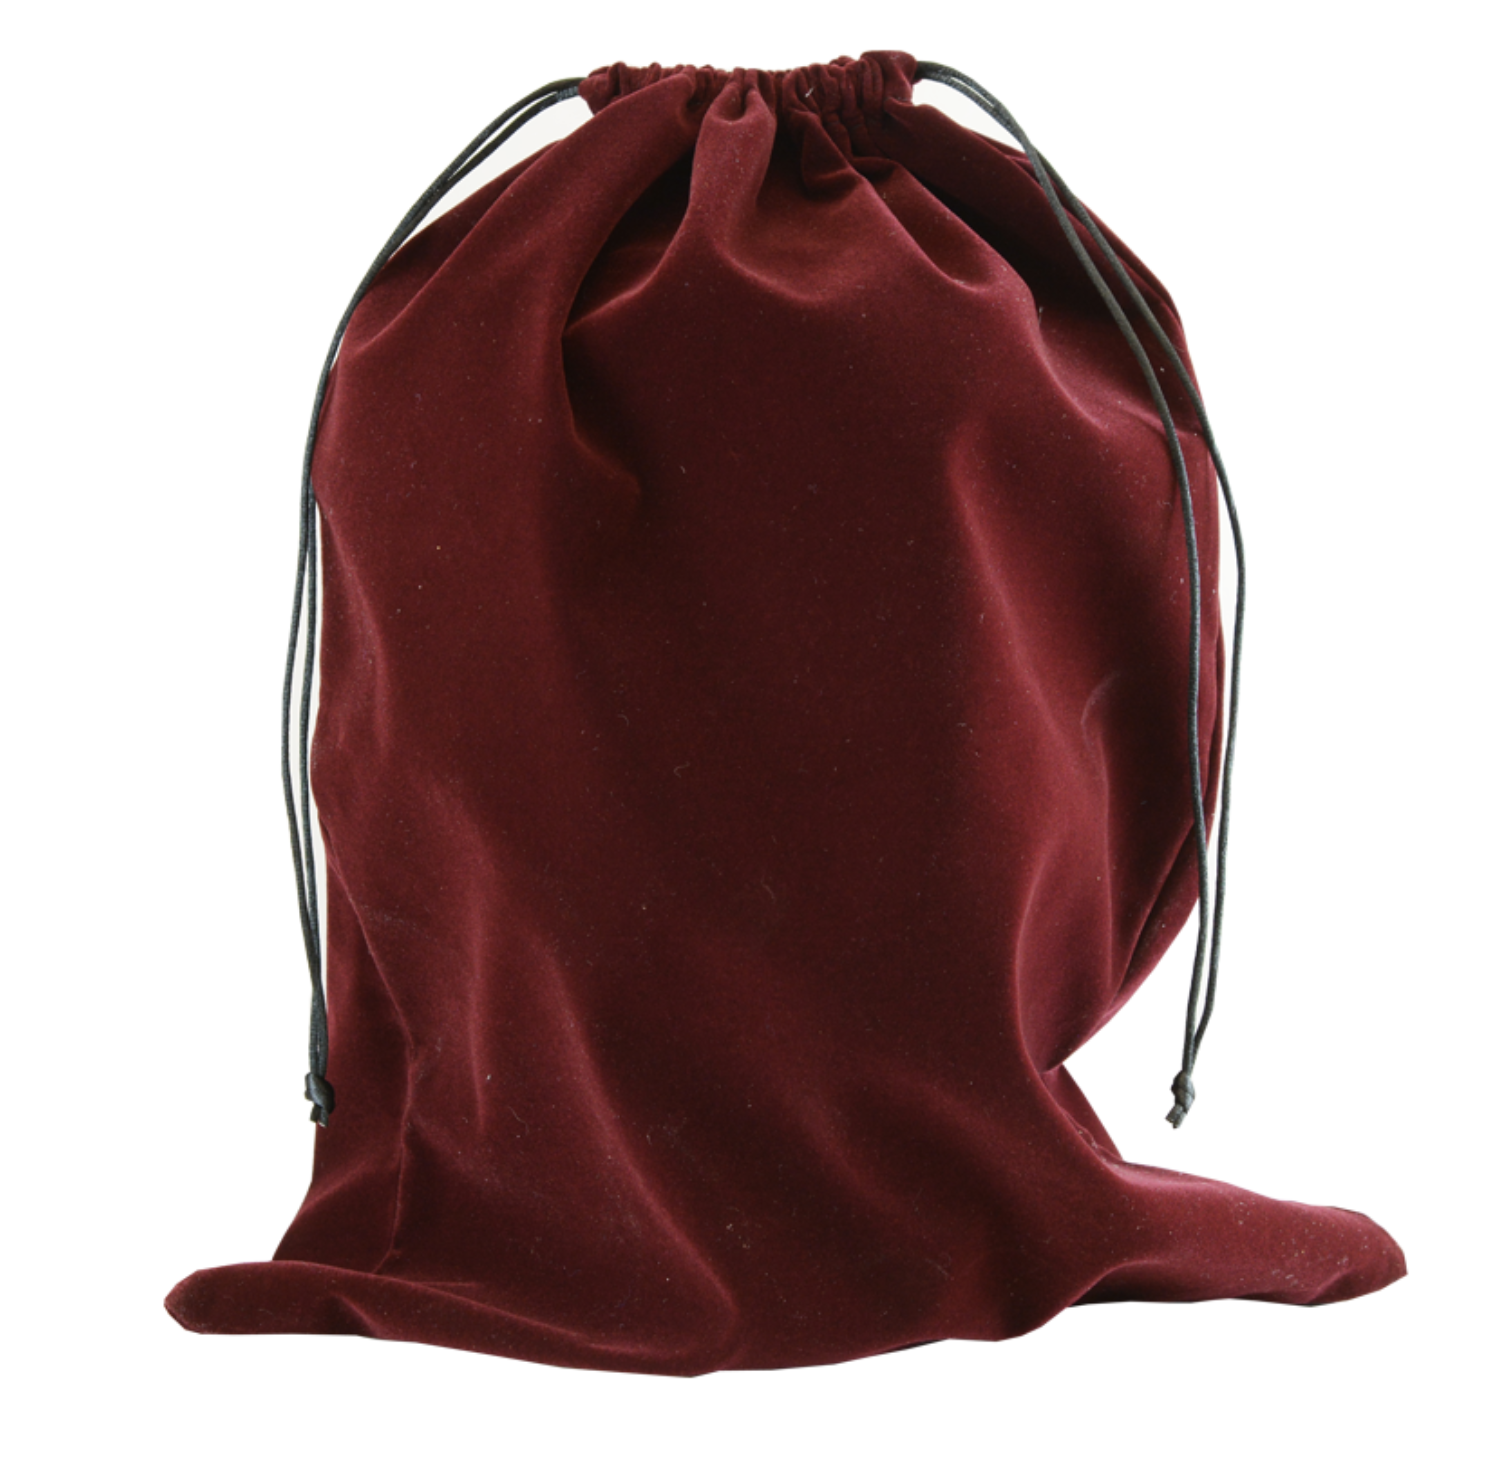 Urn hand luggage bag for carrying an Urn into the airplane | legendURN UK